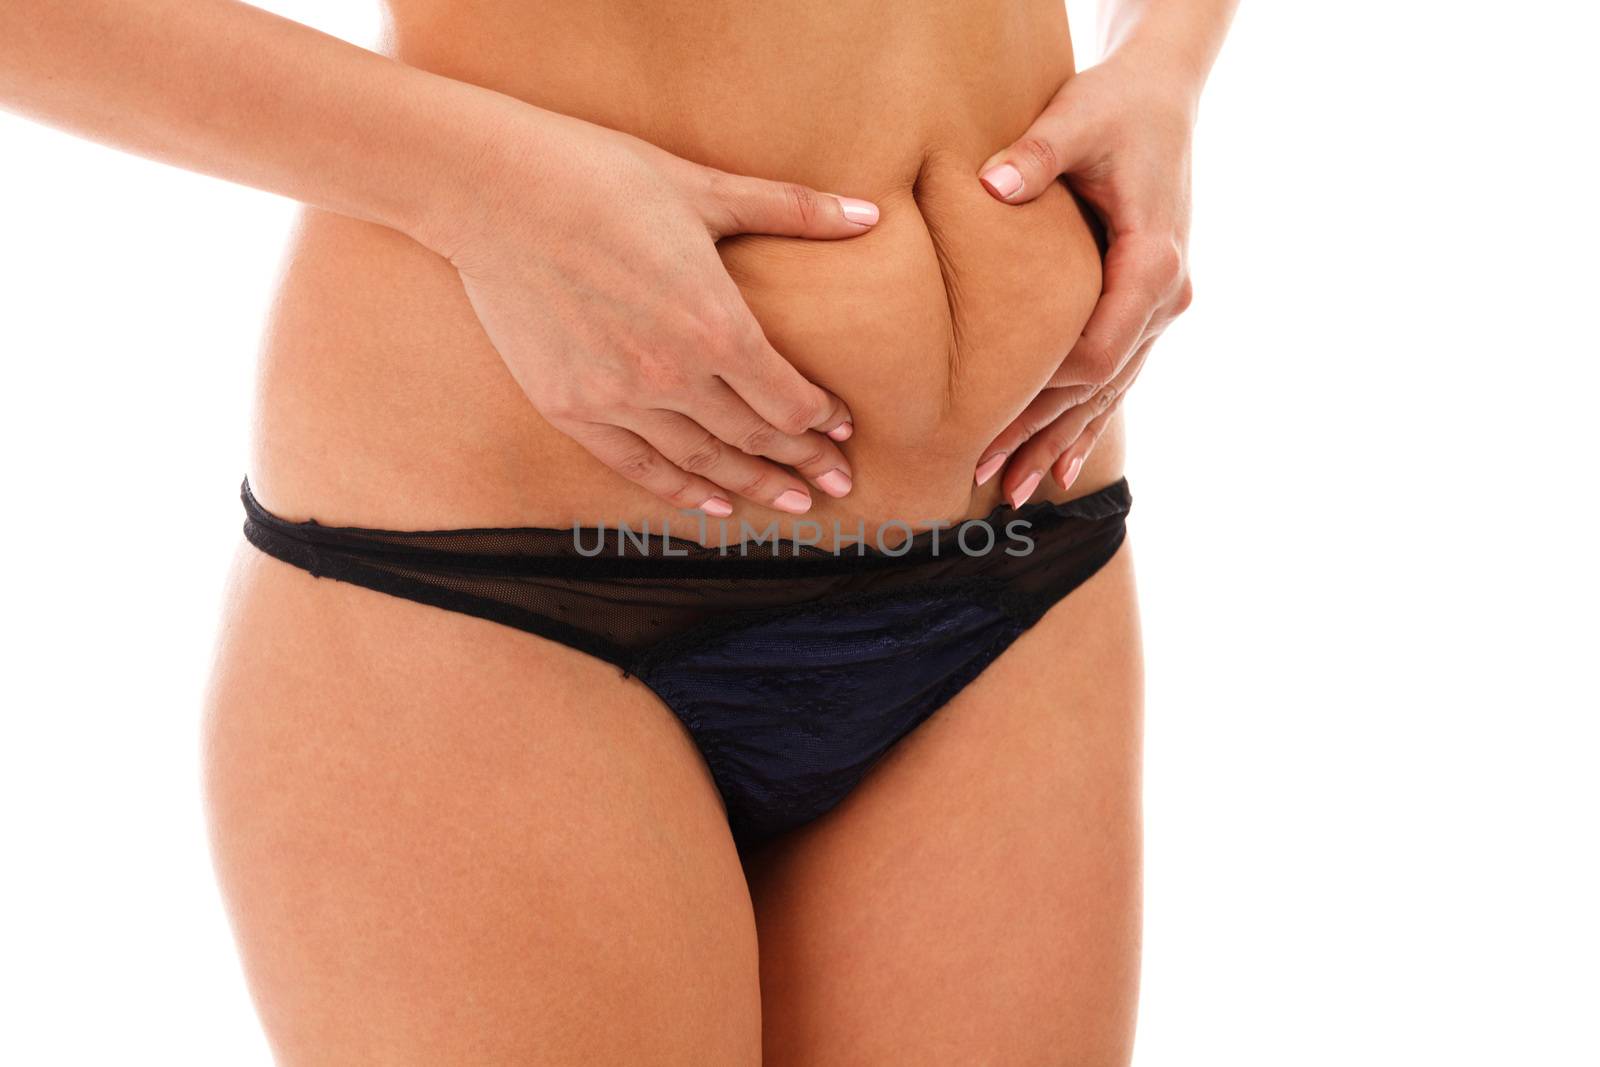 Closeup shot of overweight woman pinching her excessive belly fa by Nobilior